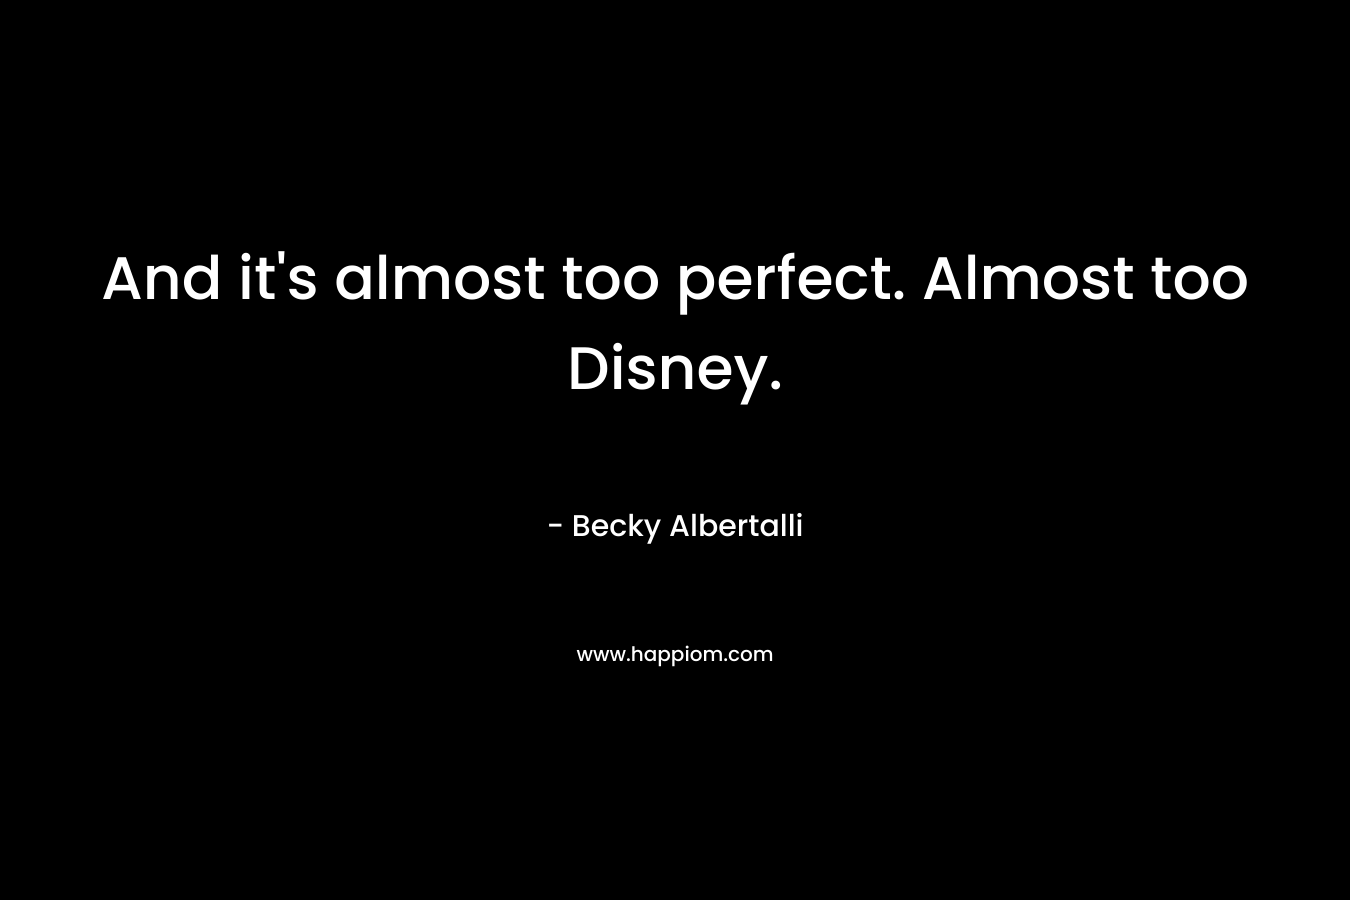 And it’s almost too perfect. Almost too Disney. – Becky Albertalli